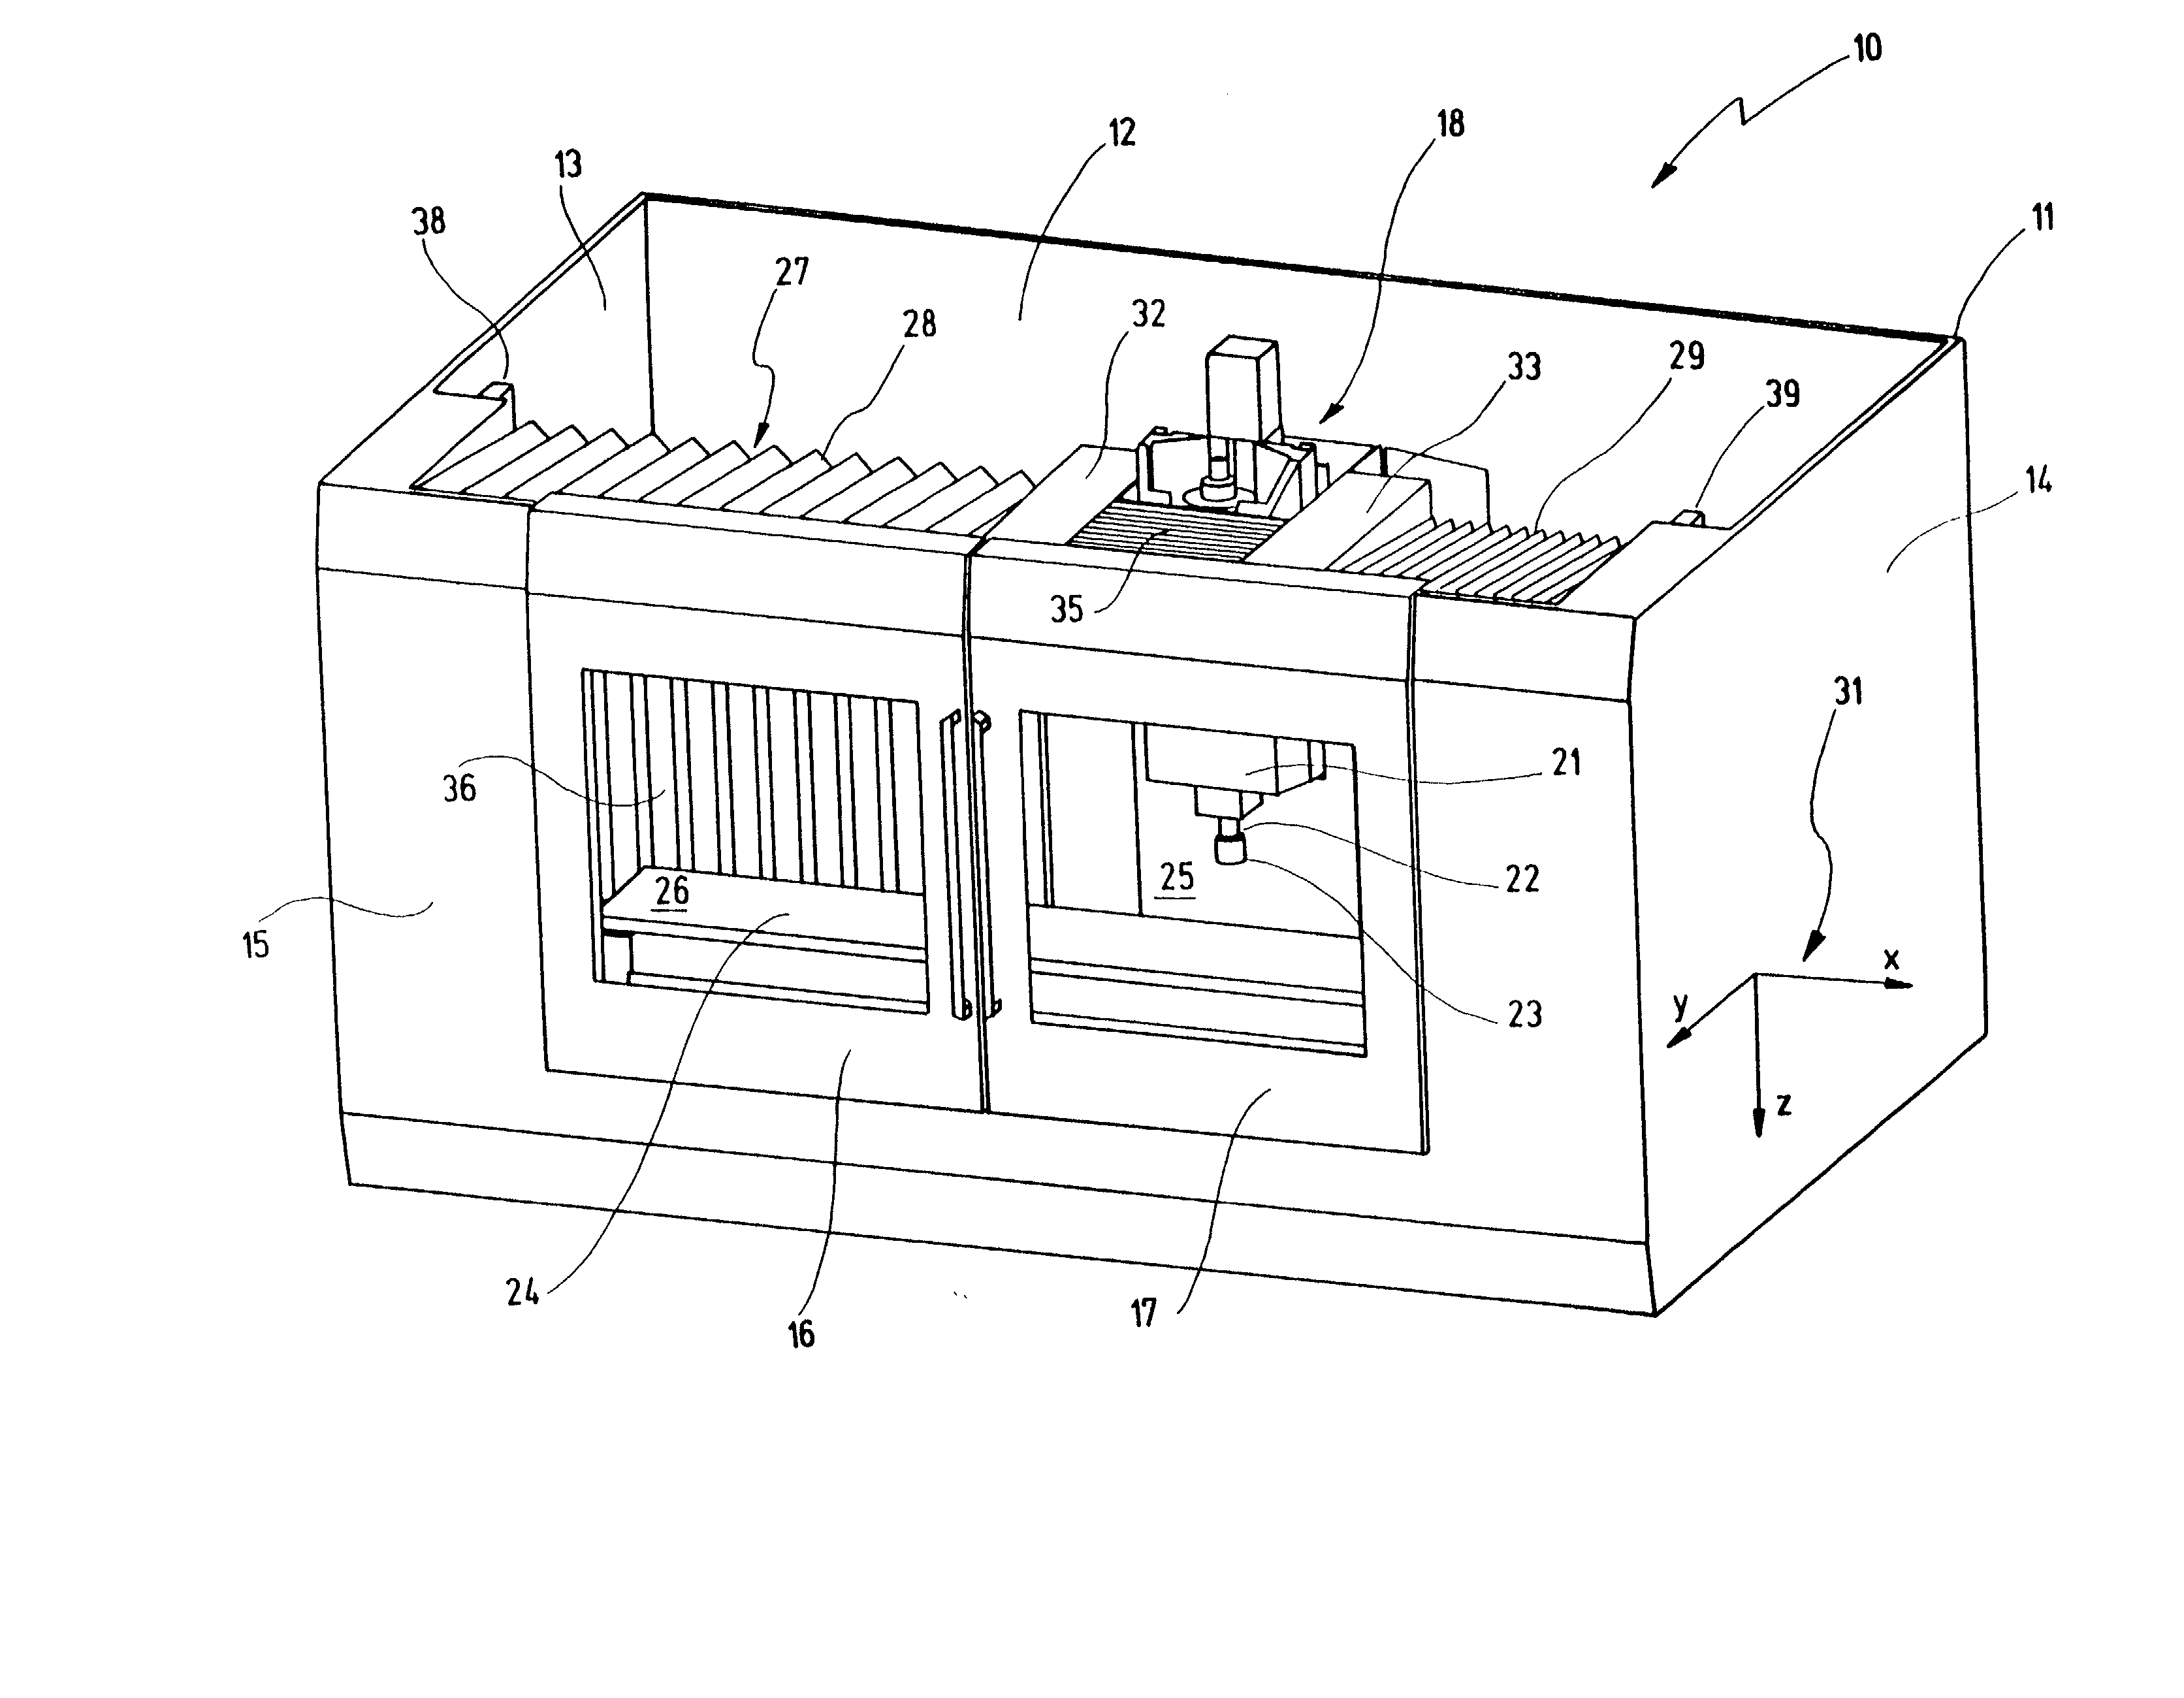 Machine tool with roof covering bellow